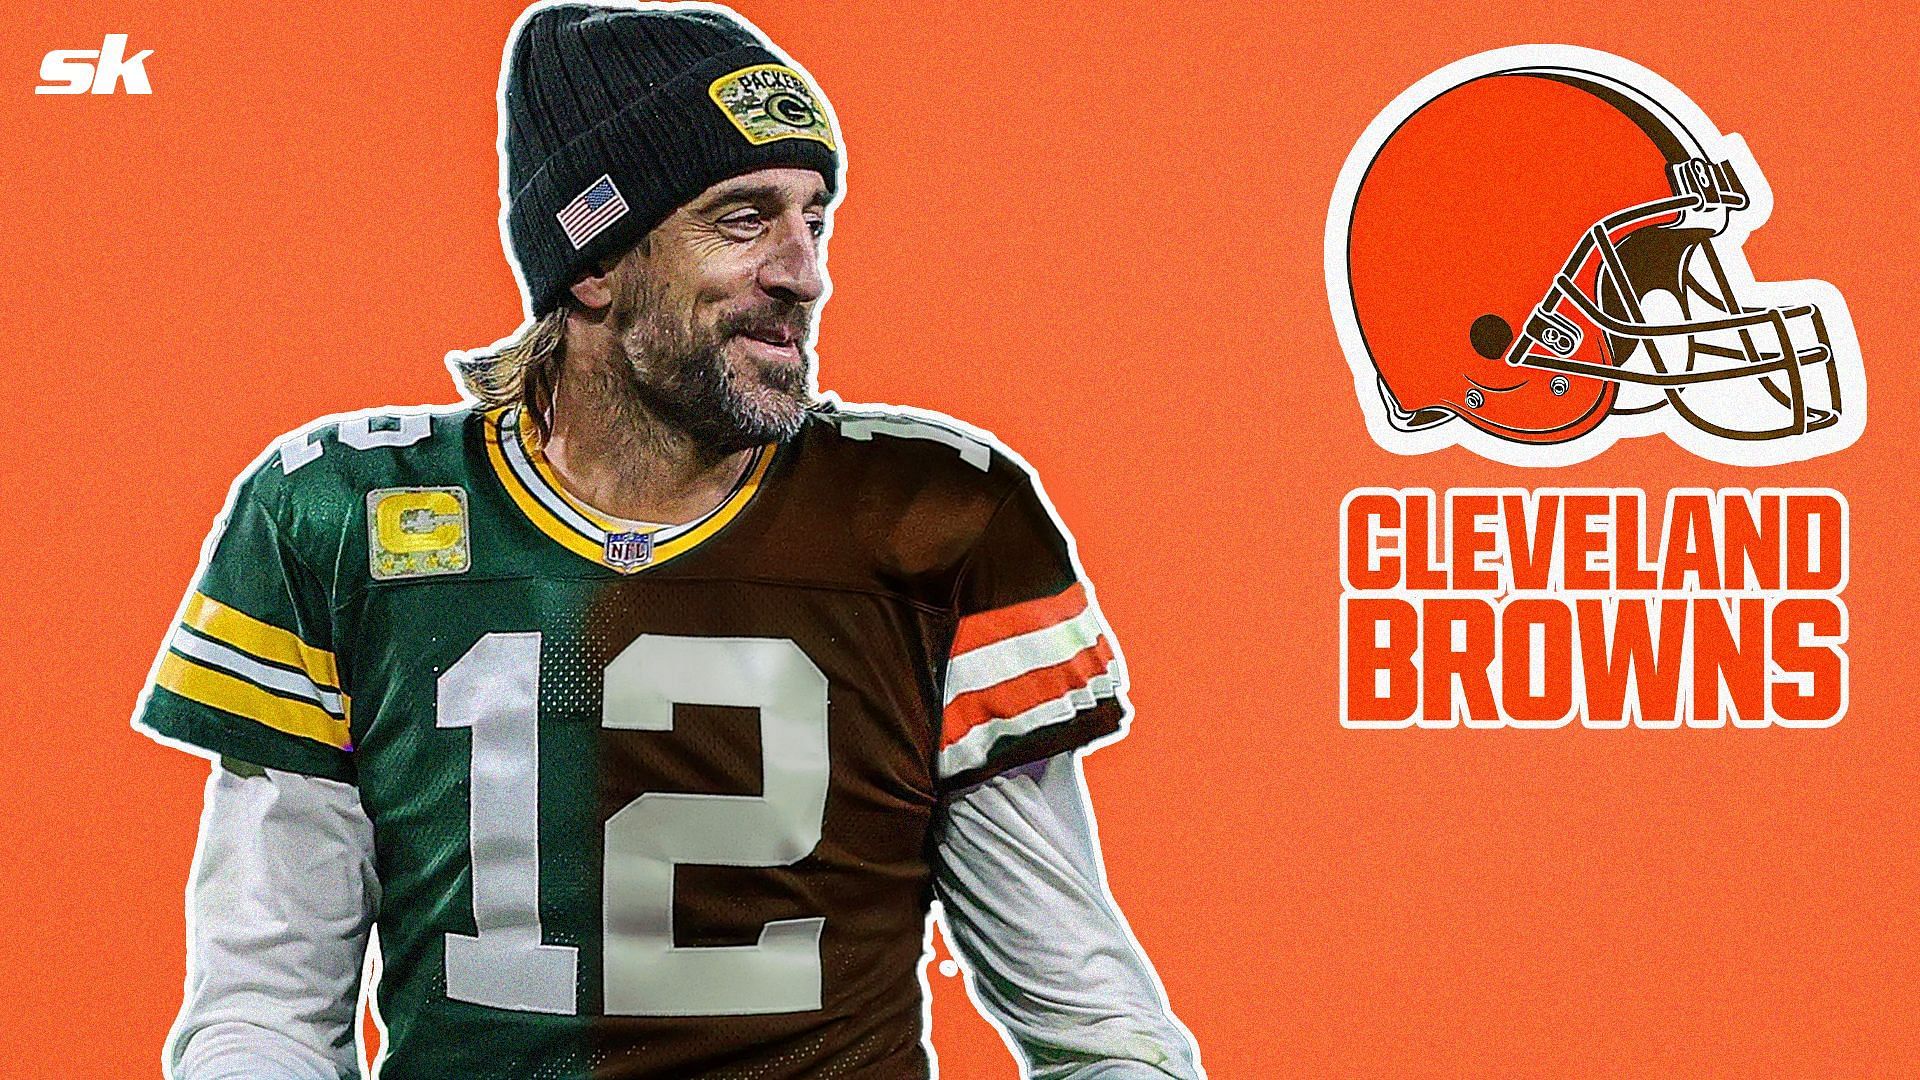 Green Bay Packers QB Aaron Rodgers in a Cleveland Browns jersey